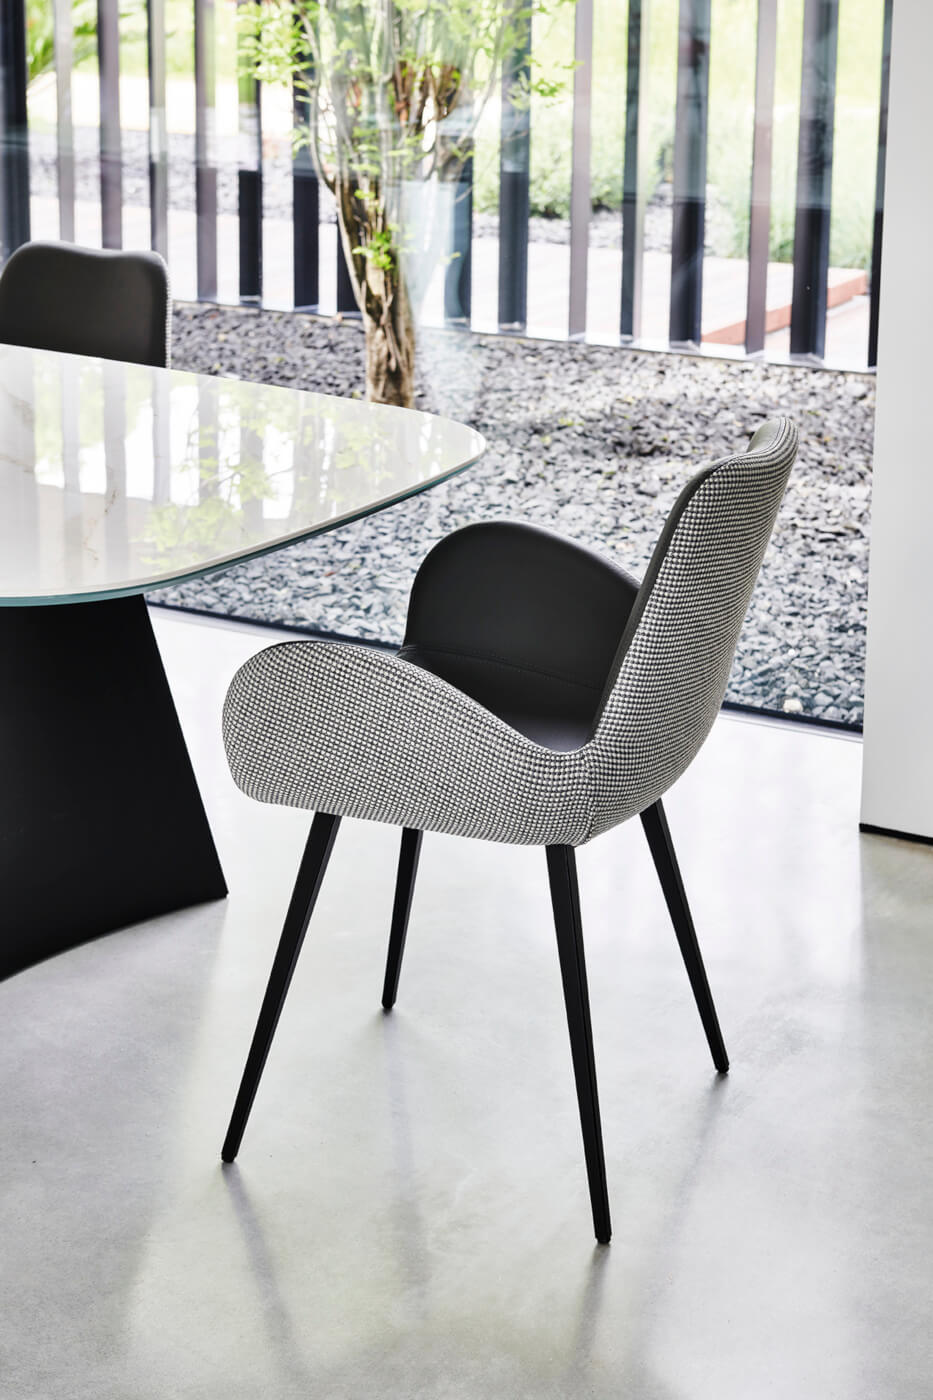 Dalia study chair with steel sled base and gray and black fabric seat